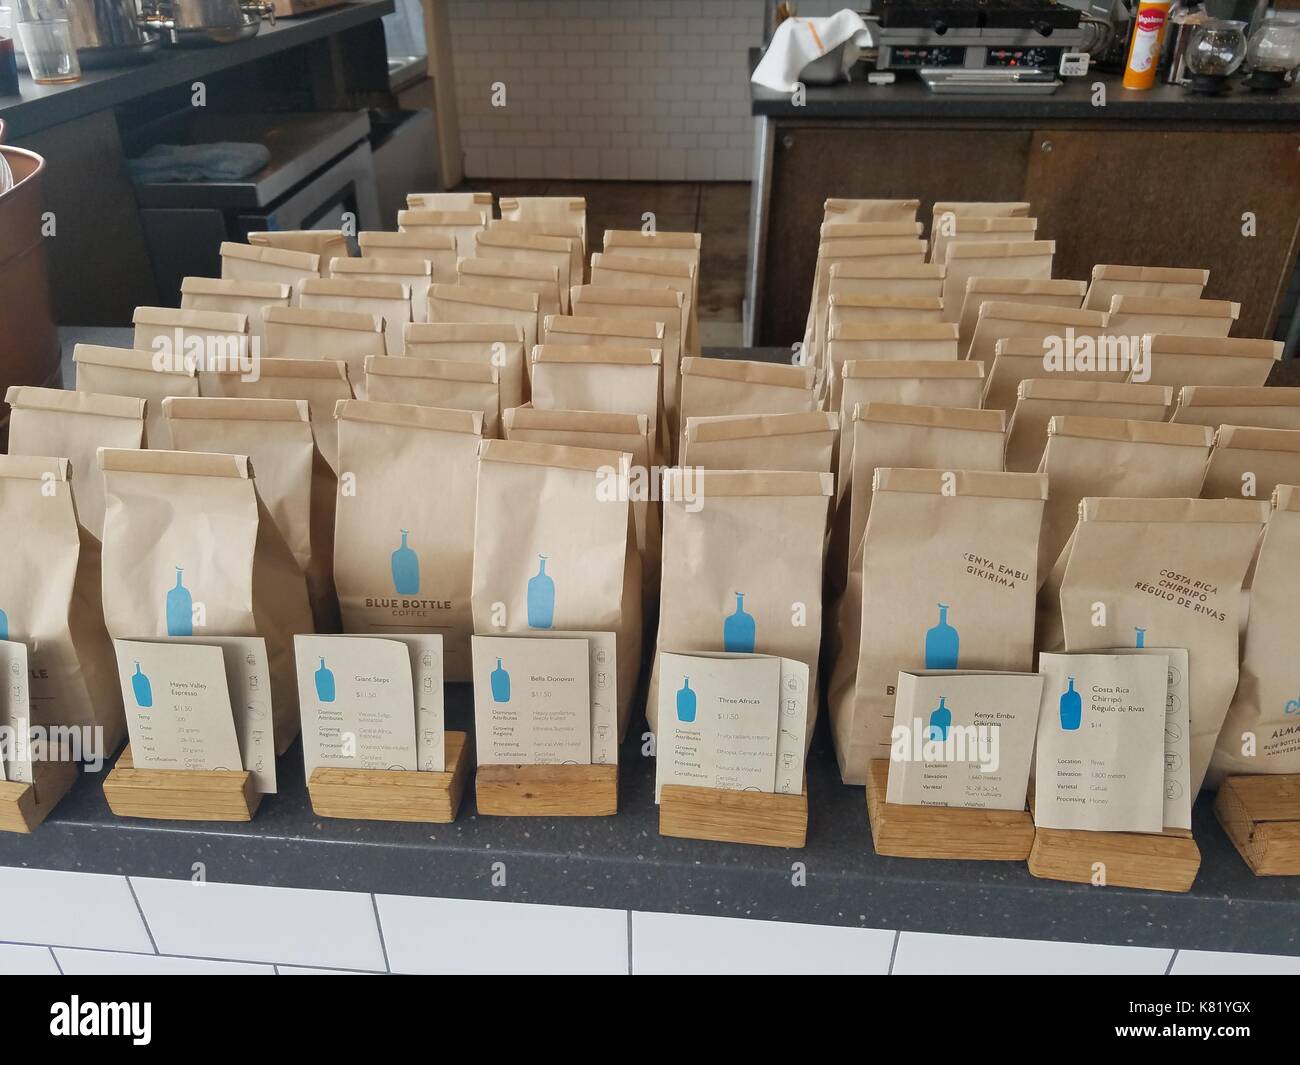 Los Angeles, SEP 17: Coffee beans package and interior view of the